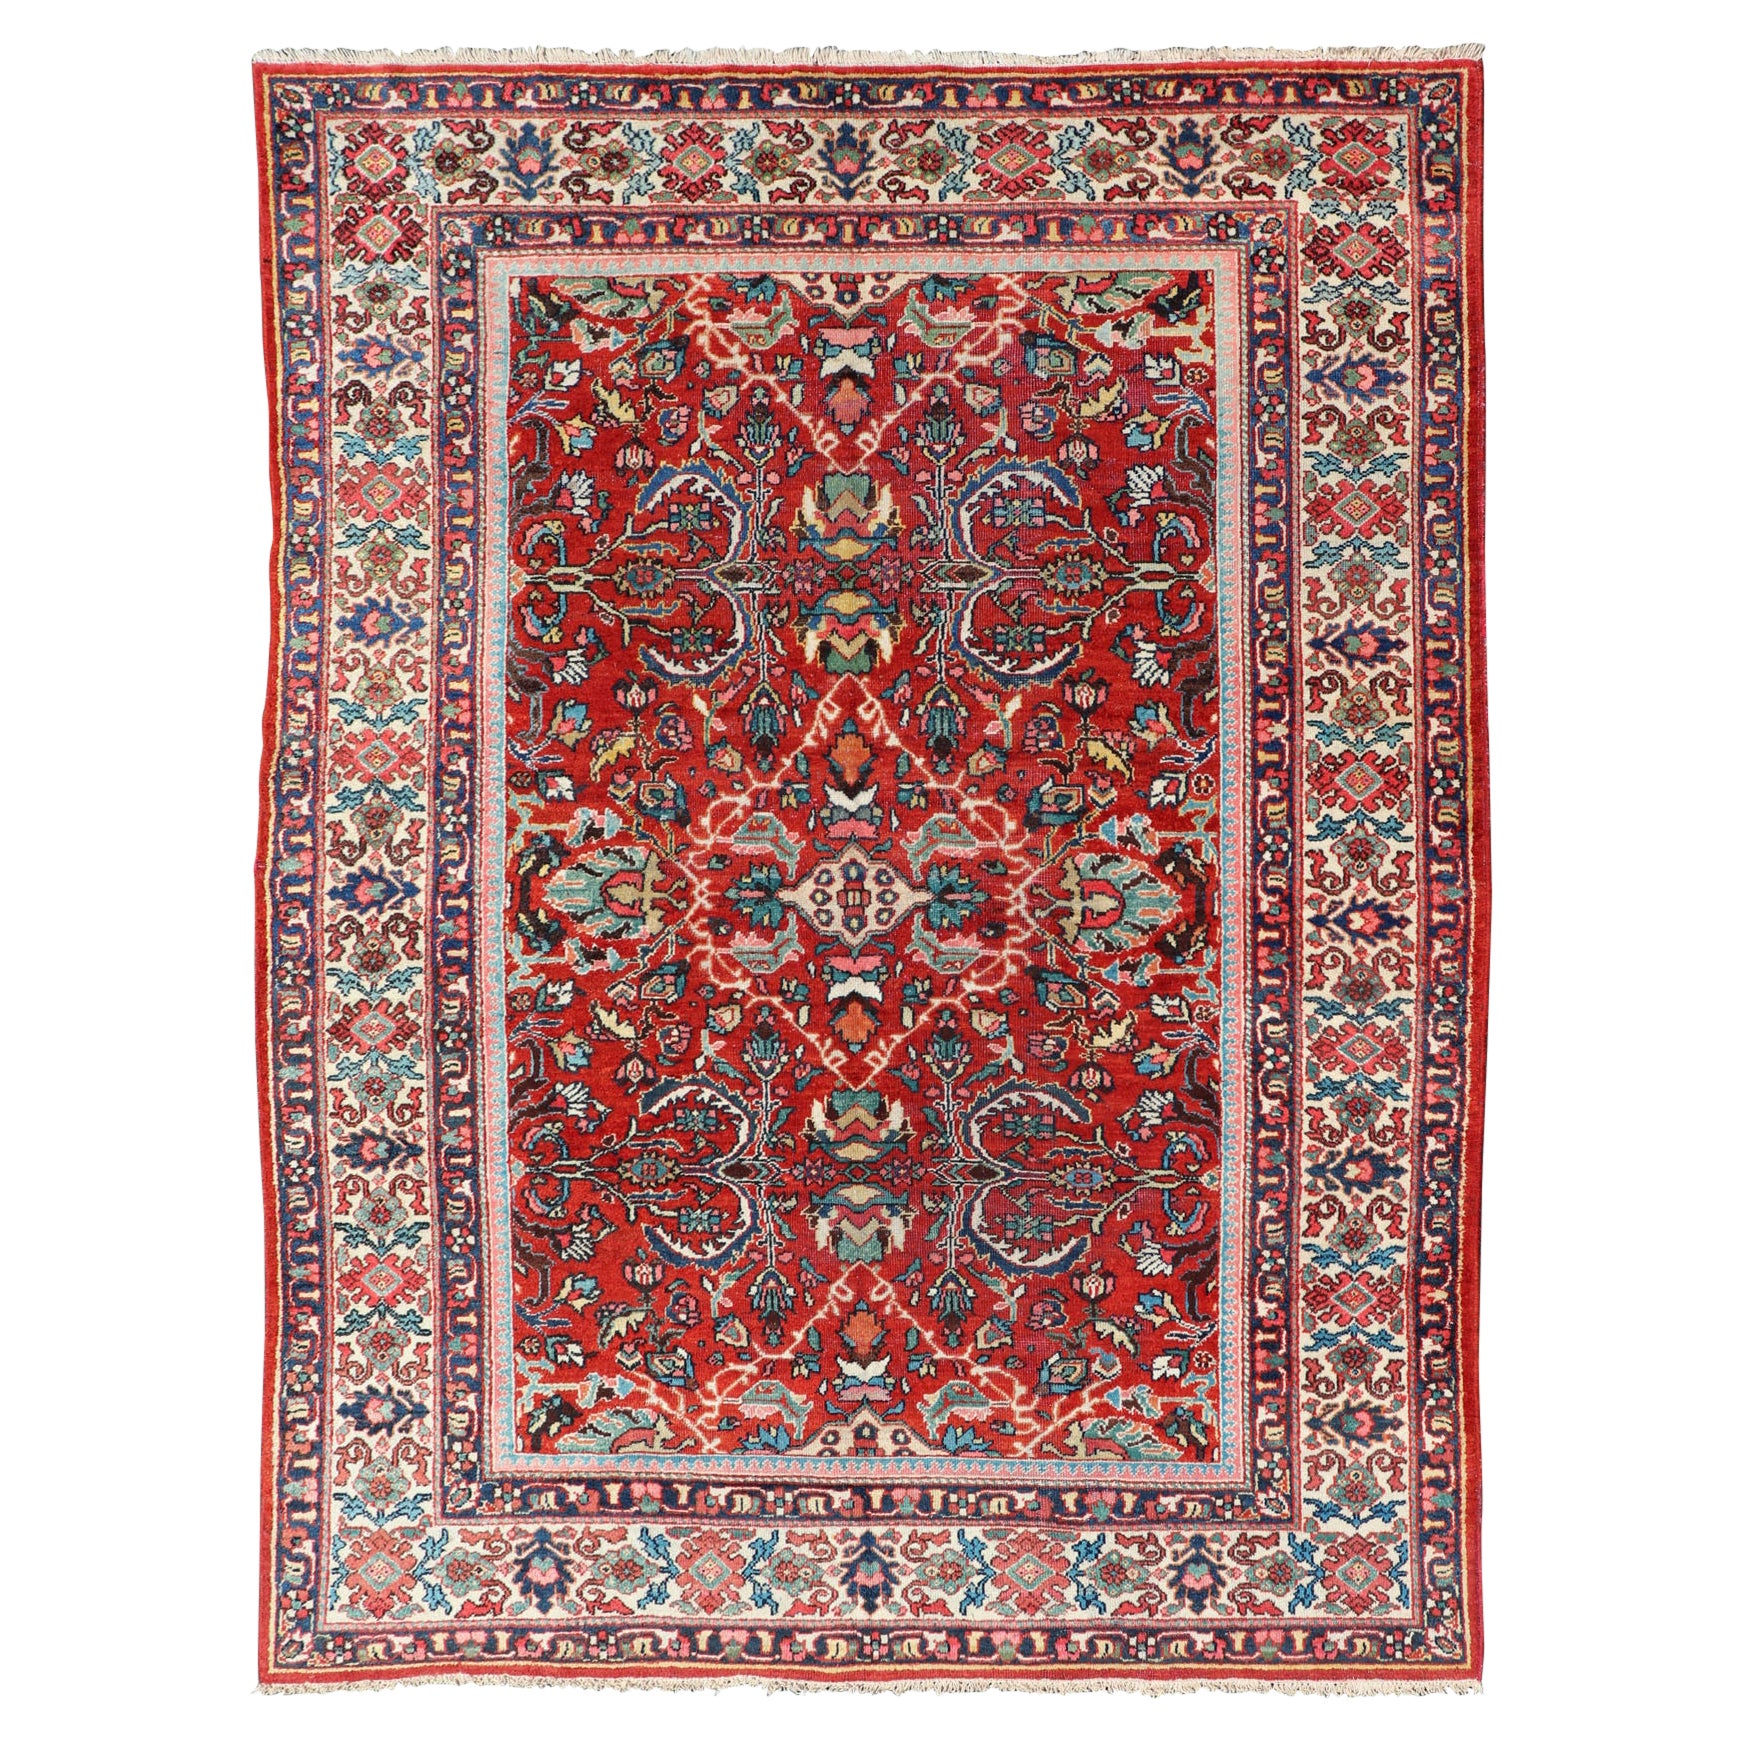  Antique Persian Mahal-Sultanabad Rug with All-Over Geometric Design For Sale